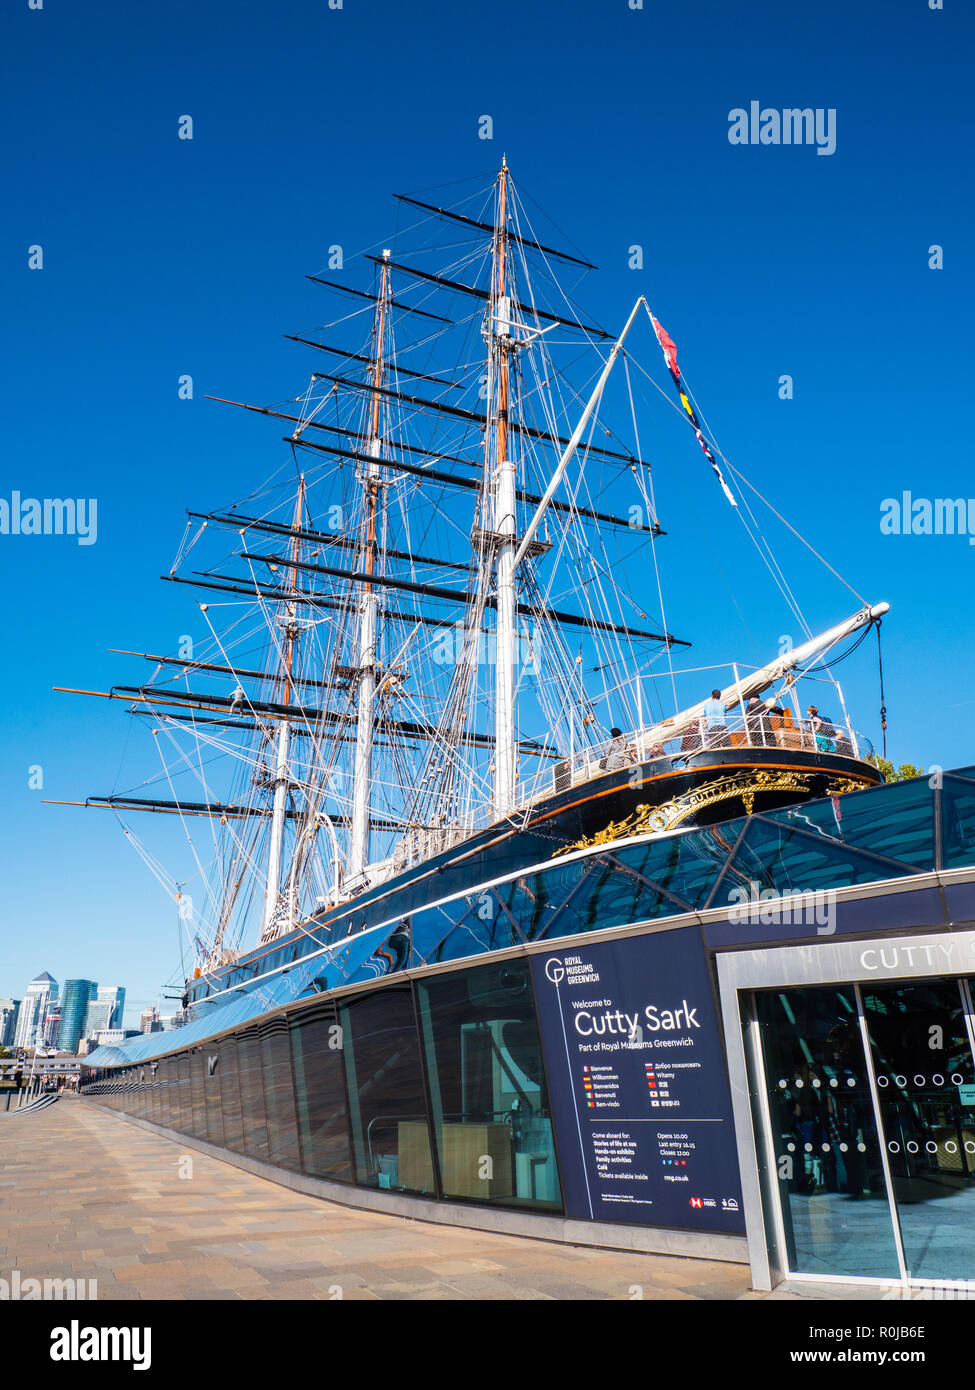 Cutty Sark, with Canary Wharf in background, British Clipper Ship, Museum ship, Greenwich, London, England, UK, GB. Stock Photo